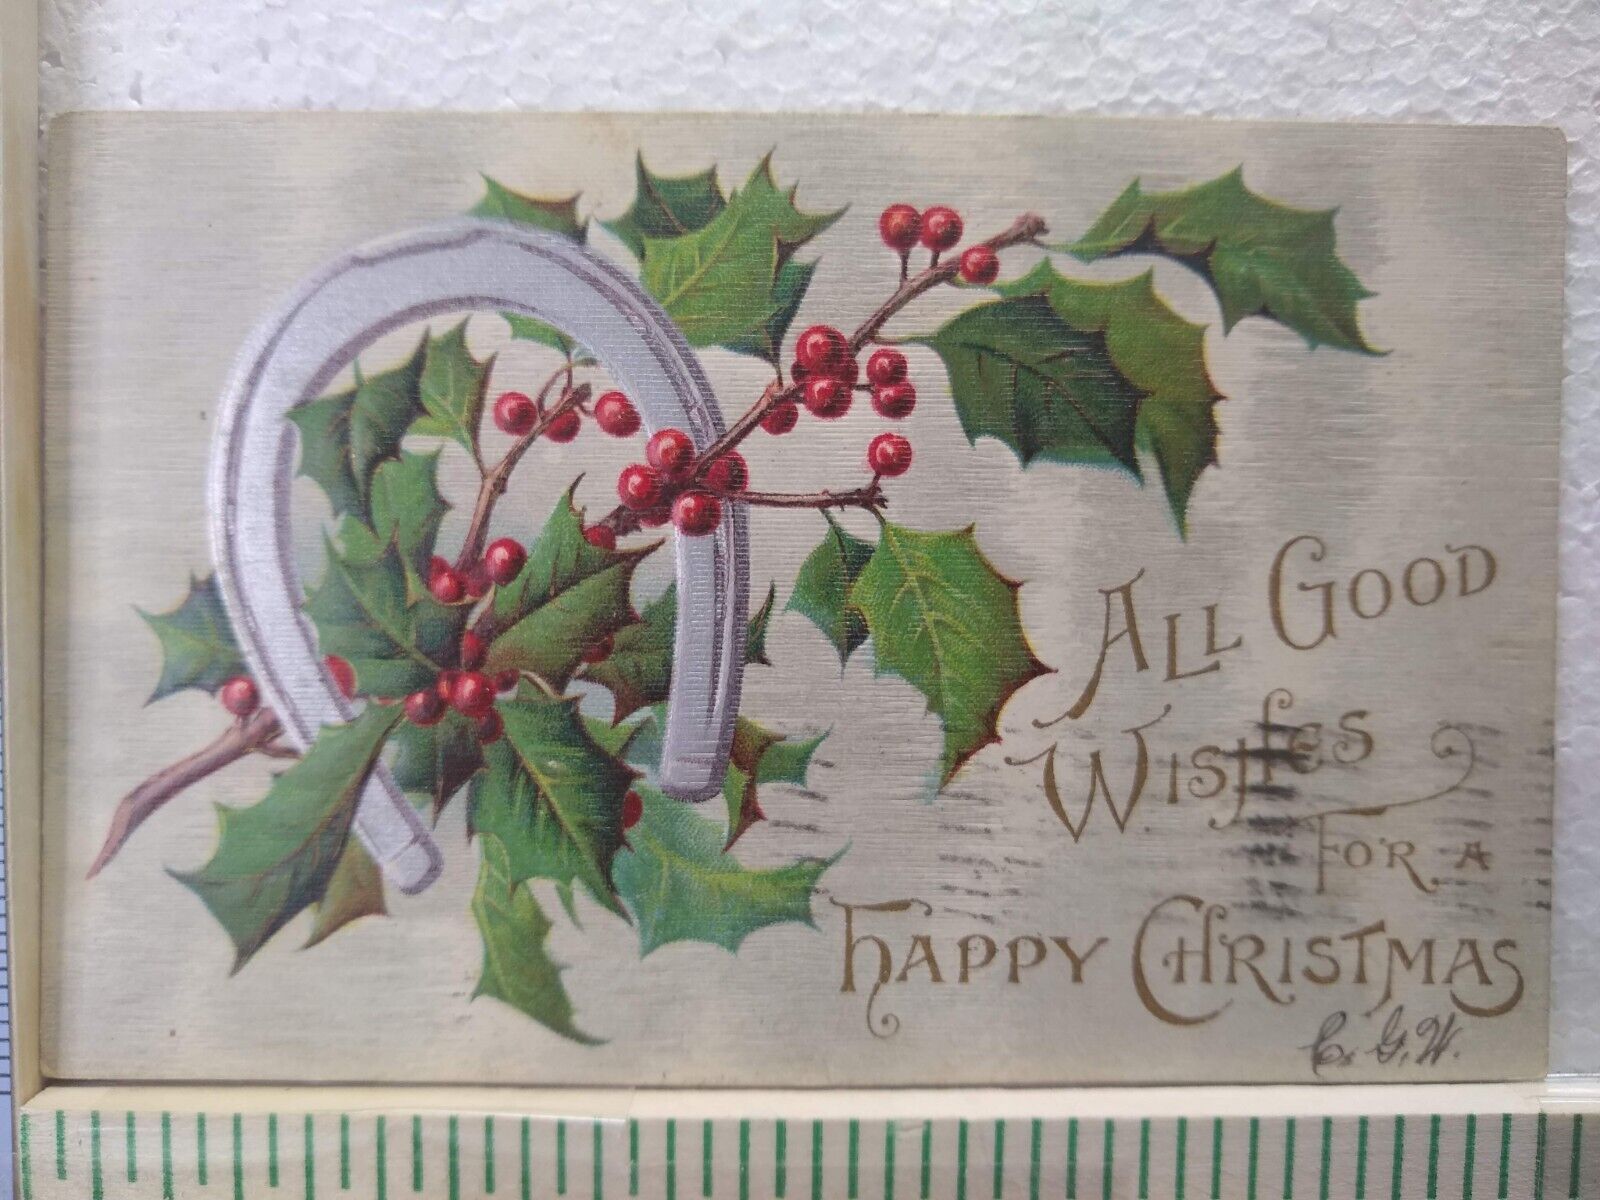 Postcard All Good Wishes for a Happy Christmas Holiday Art Print Greeting Card